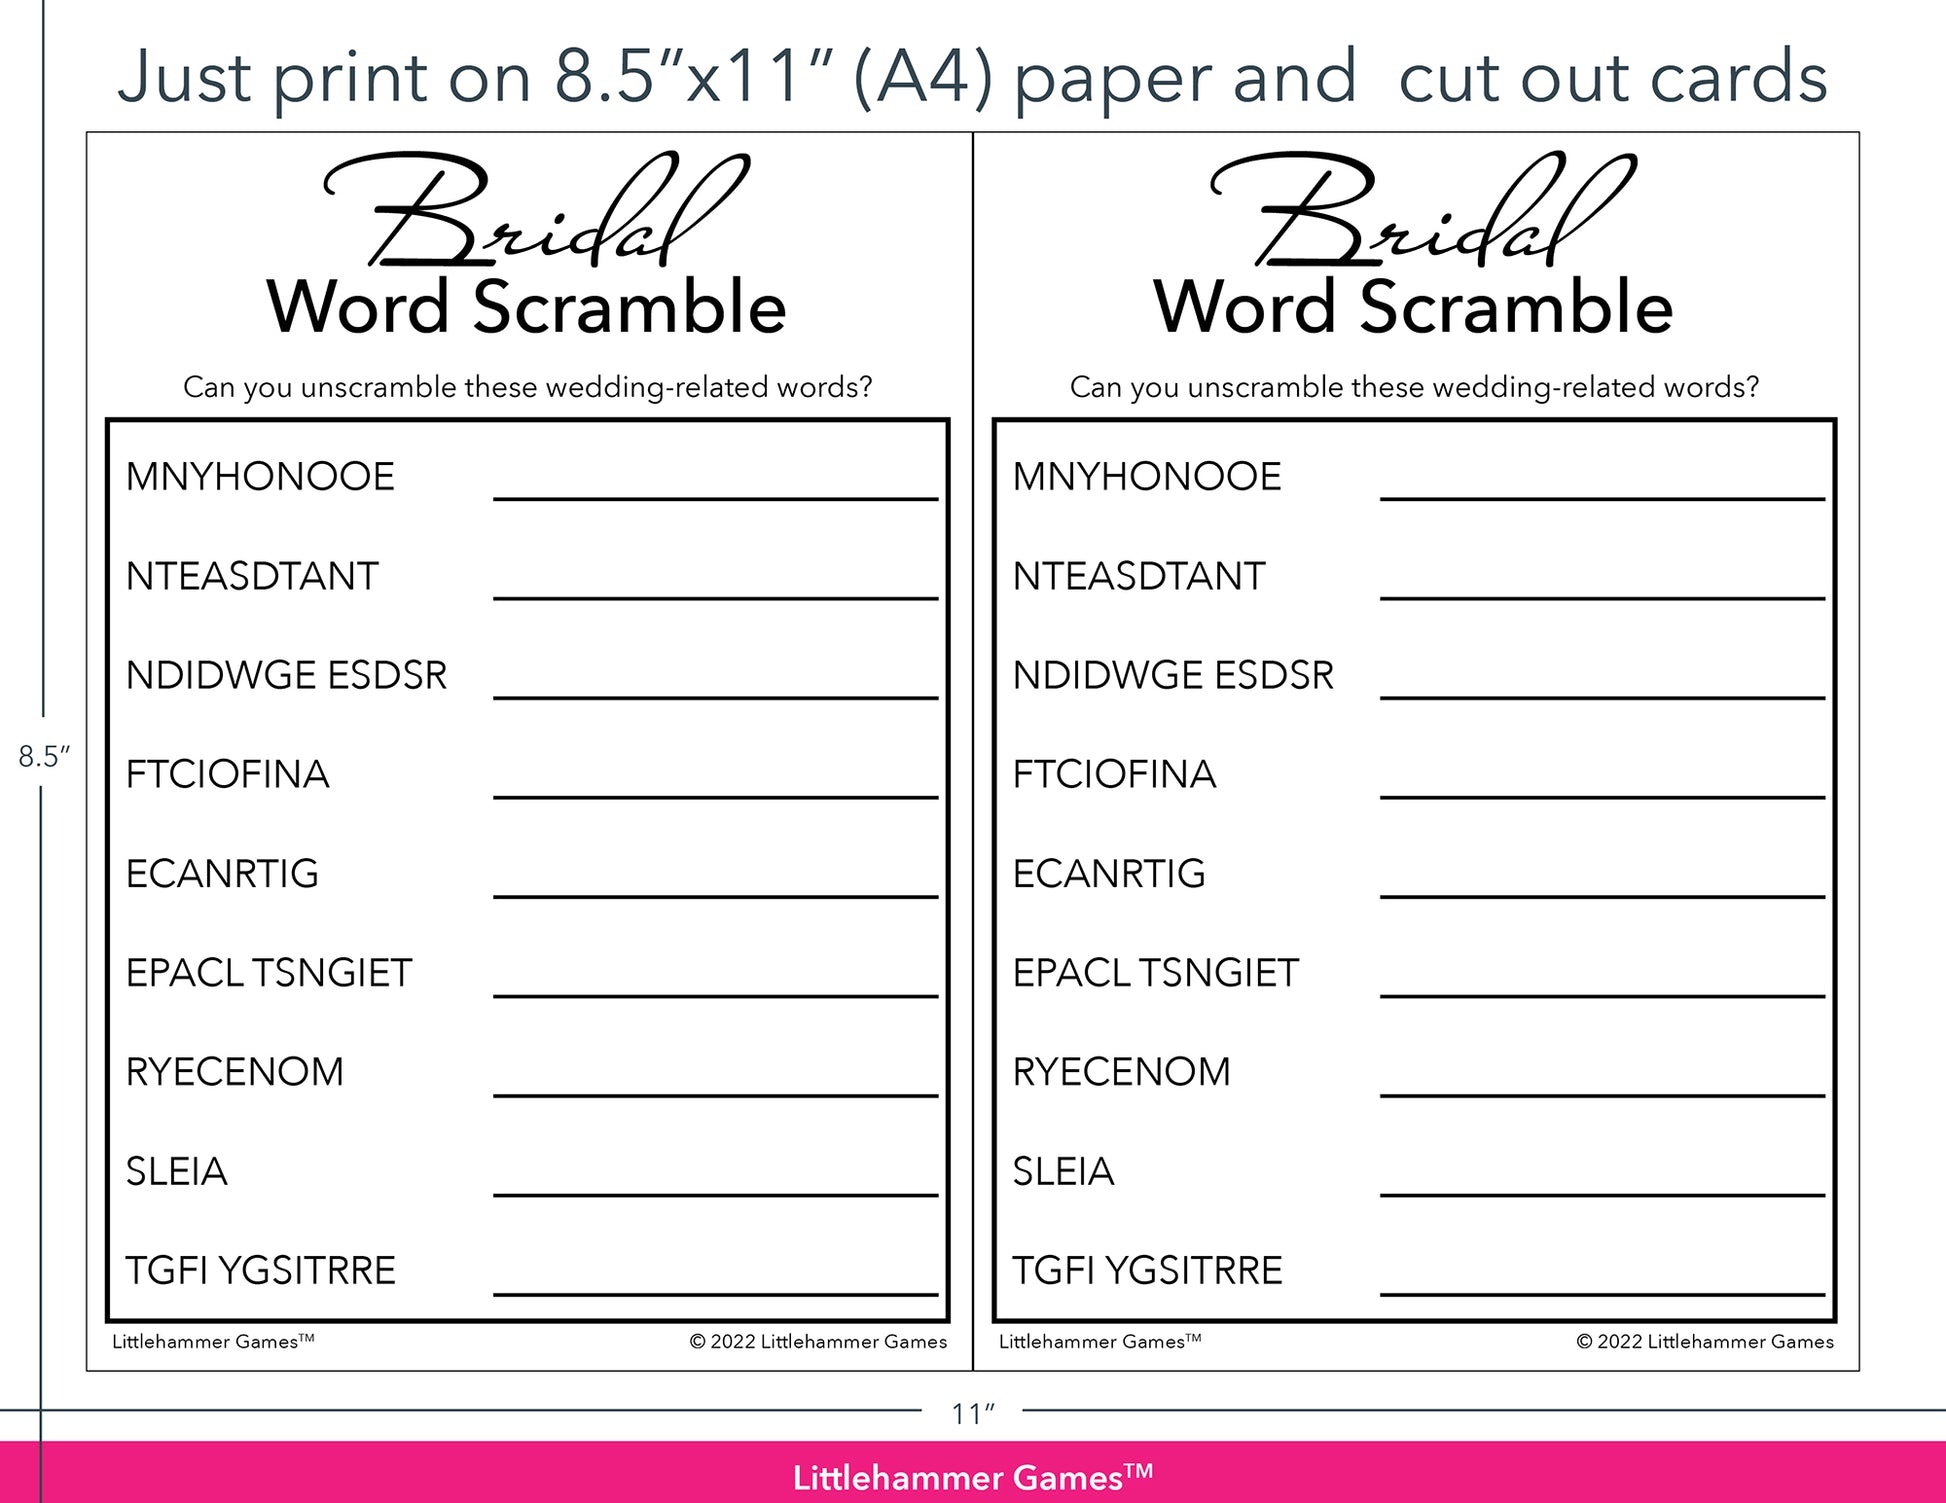 Bridal Word Scramble black and white game cards with printing instructions